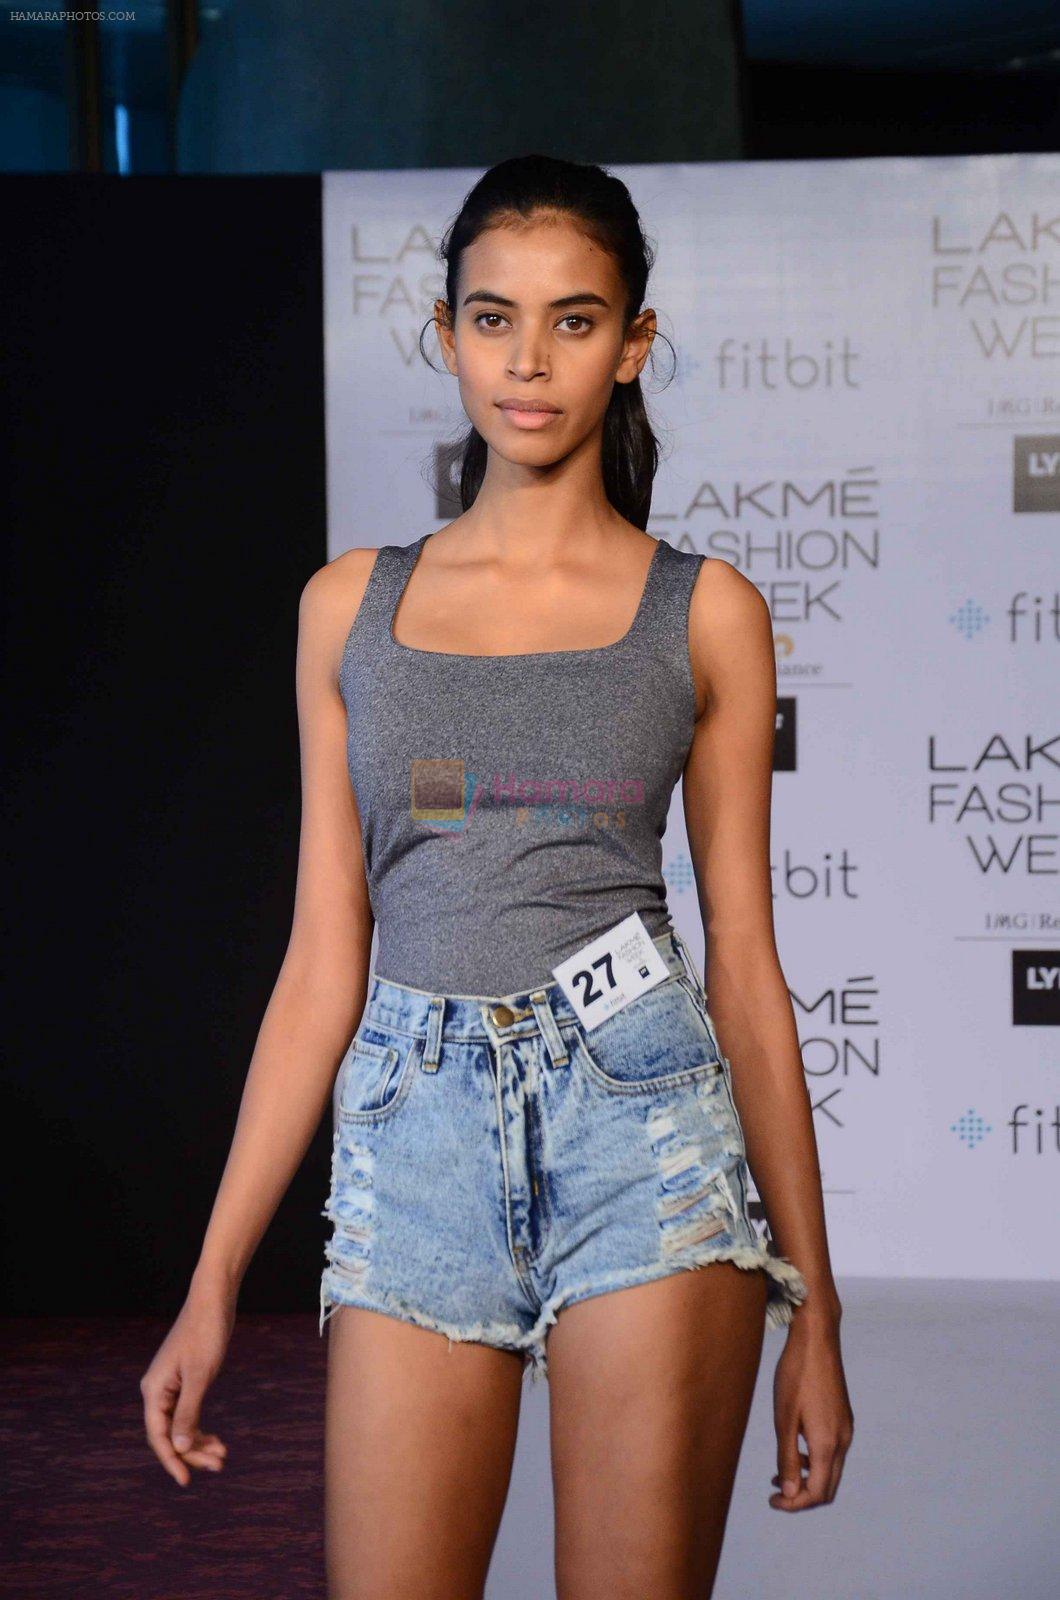 at Lakme model auditions in Mumbai on 23rd Feb 2016